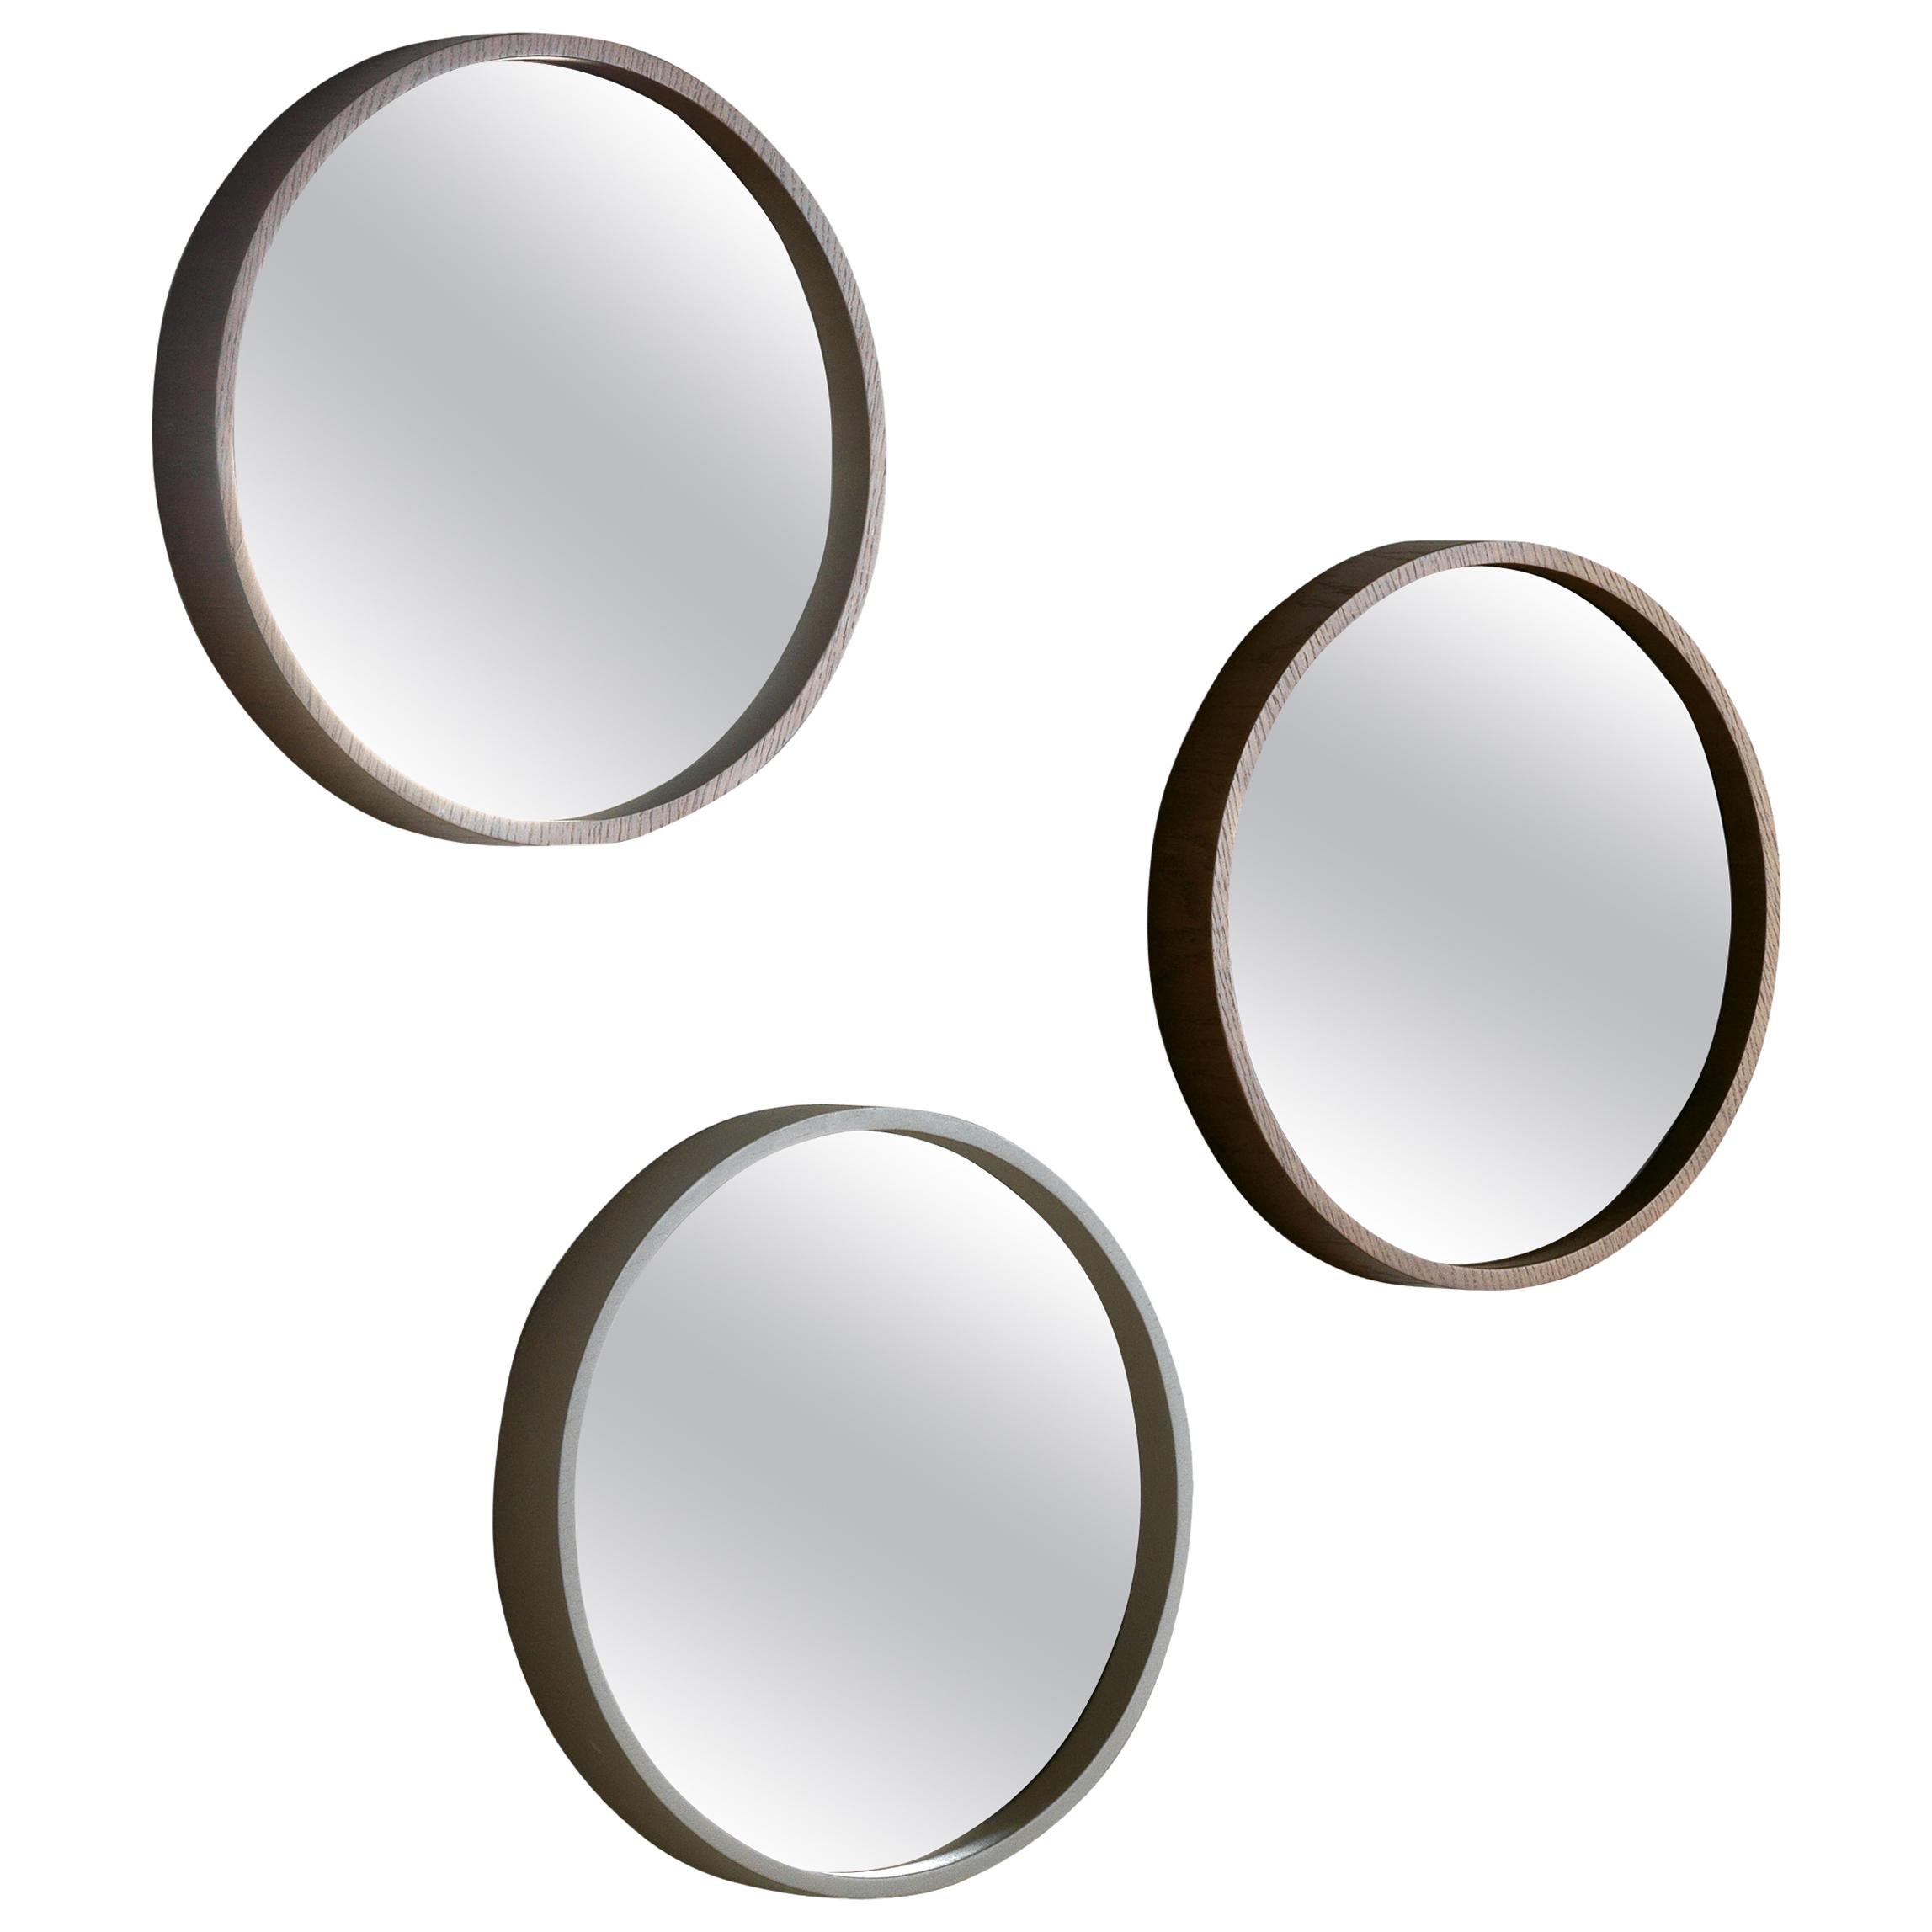 Pacini & Cappellini Oblo Mirror in Lacquered Wood by Studio Controdesign For Sale